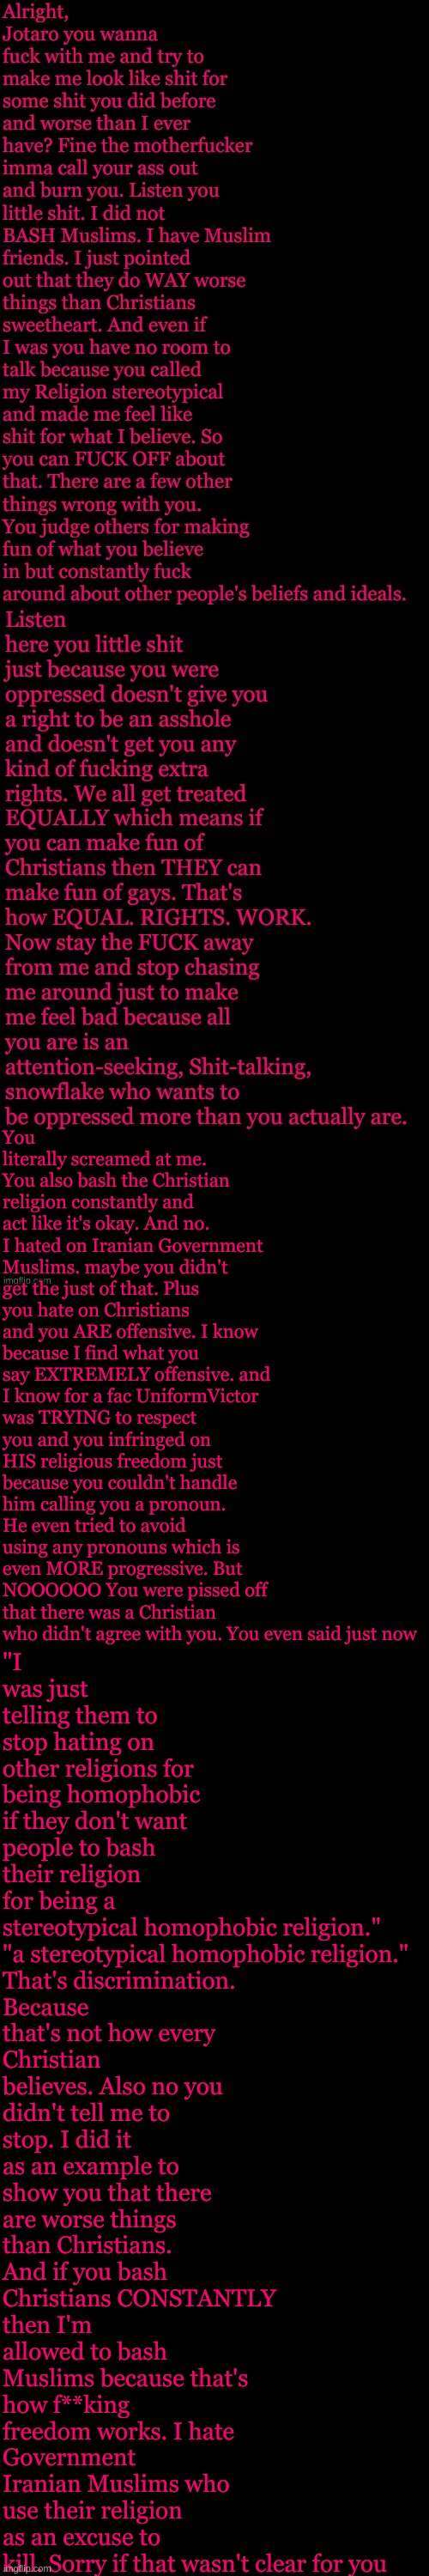 I came back to clarify since apparently I "Hate" Muslims. I tried to say I was sorry and just leave but you had to keep pushing. | "I was just telling them to stop hating on other religions for being homophobic if they don't want people to bash their religion for being a stereotypical homophobic religion."

"a stereotypical homophobic religion."

That's discrimination. Because that's not how every Christian believes. Also no you didn't tell me to stop. I did it as an example to show you that there are worse things than Christians. And if you bash Christians CONSTANTLY then I'm allowed to bash Muslims because that's how f**king freedom works. I hate Government Iranian Muslims who use their religion as an excuse to kill. Sorry if that wasn't clear for you; You literally screamed at me.
You also bash the Christian religion constantly and act like it's okay. And no. I hated on Iranian Government Muslims. maybe you didn't get the just of that. Plus you hate on Christians and you ARE offensive. I know because I find what you say EXTREMELY offensive. and I know for a fac UniformVictor was TRYING to respect you and you infringed on HIS religious freedom just because you couldn't handle him calling you a pronoun. He even tried to avoid using any pronouns which is even MORE progressive. But NOOOOOO You were pissed off that there was a Christian who didn't agree with you. You even said just now | made w/ Imgflip meme maker